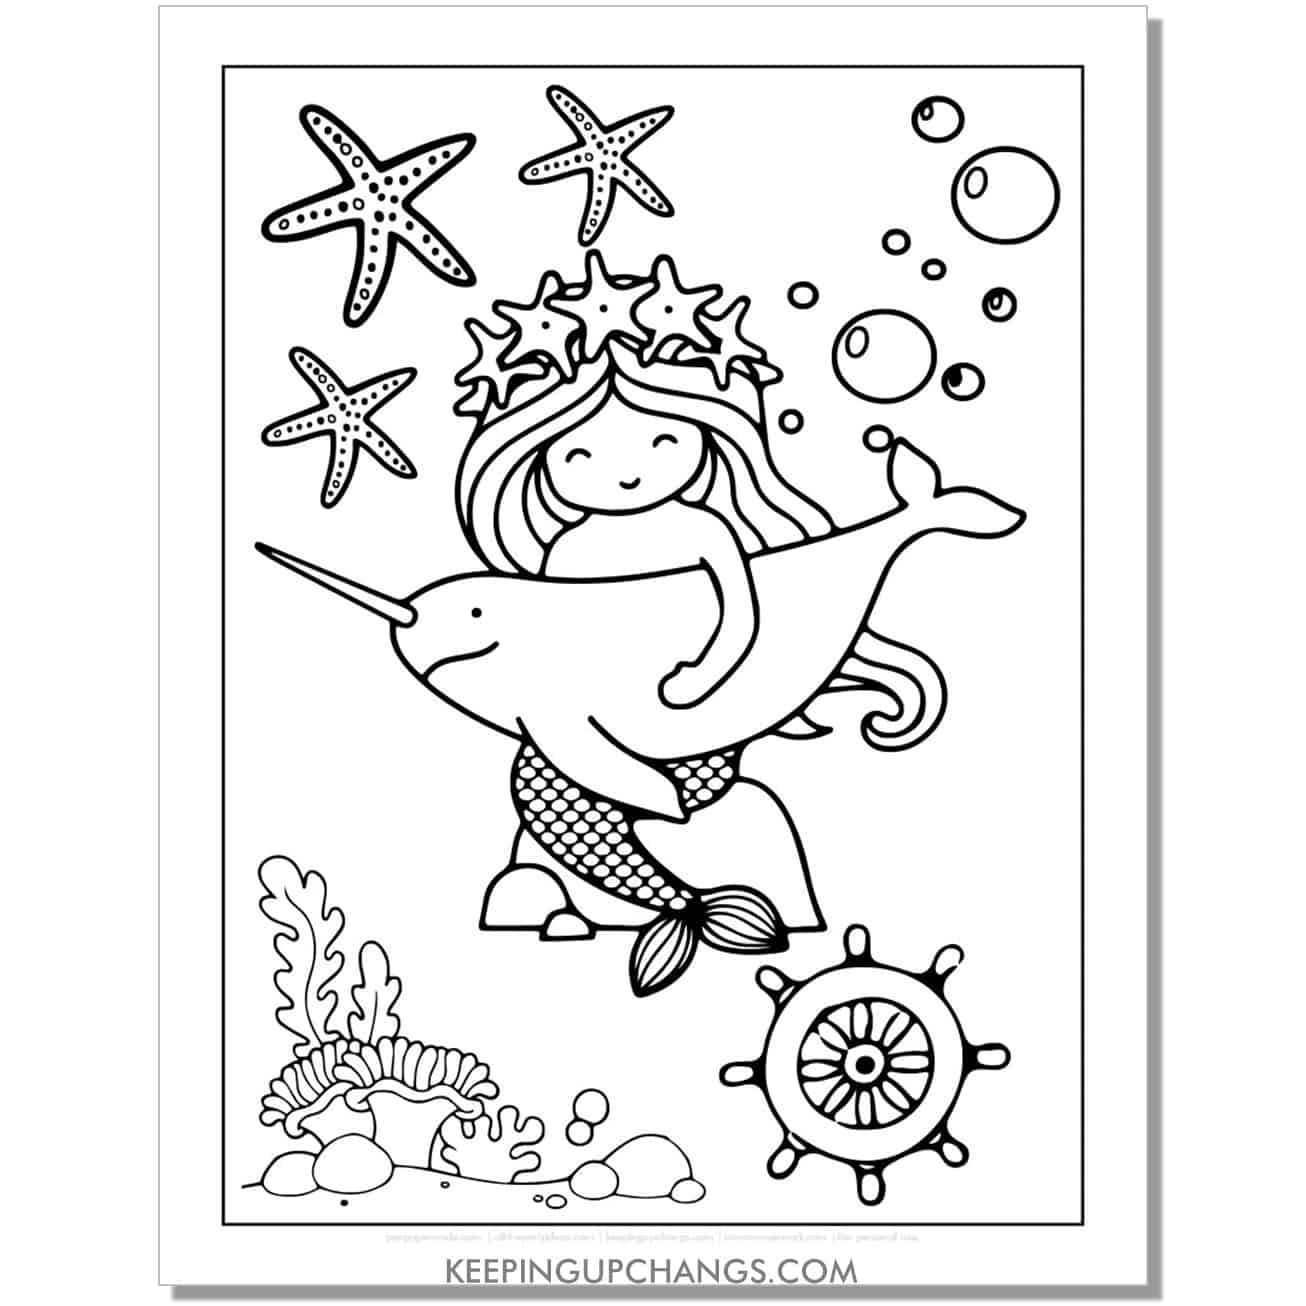 free hand drawn mermaid with narwhal, star fish coloring page, sheet.